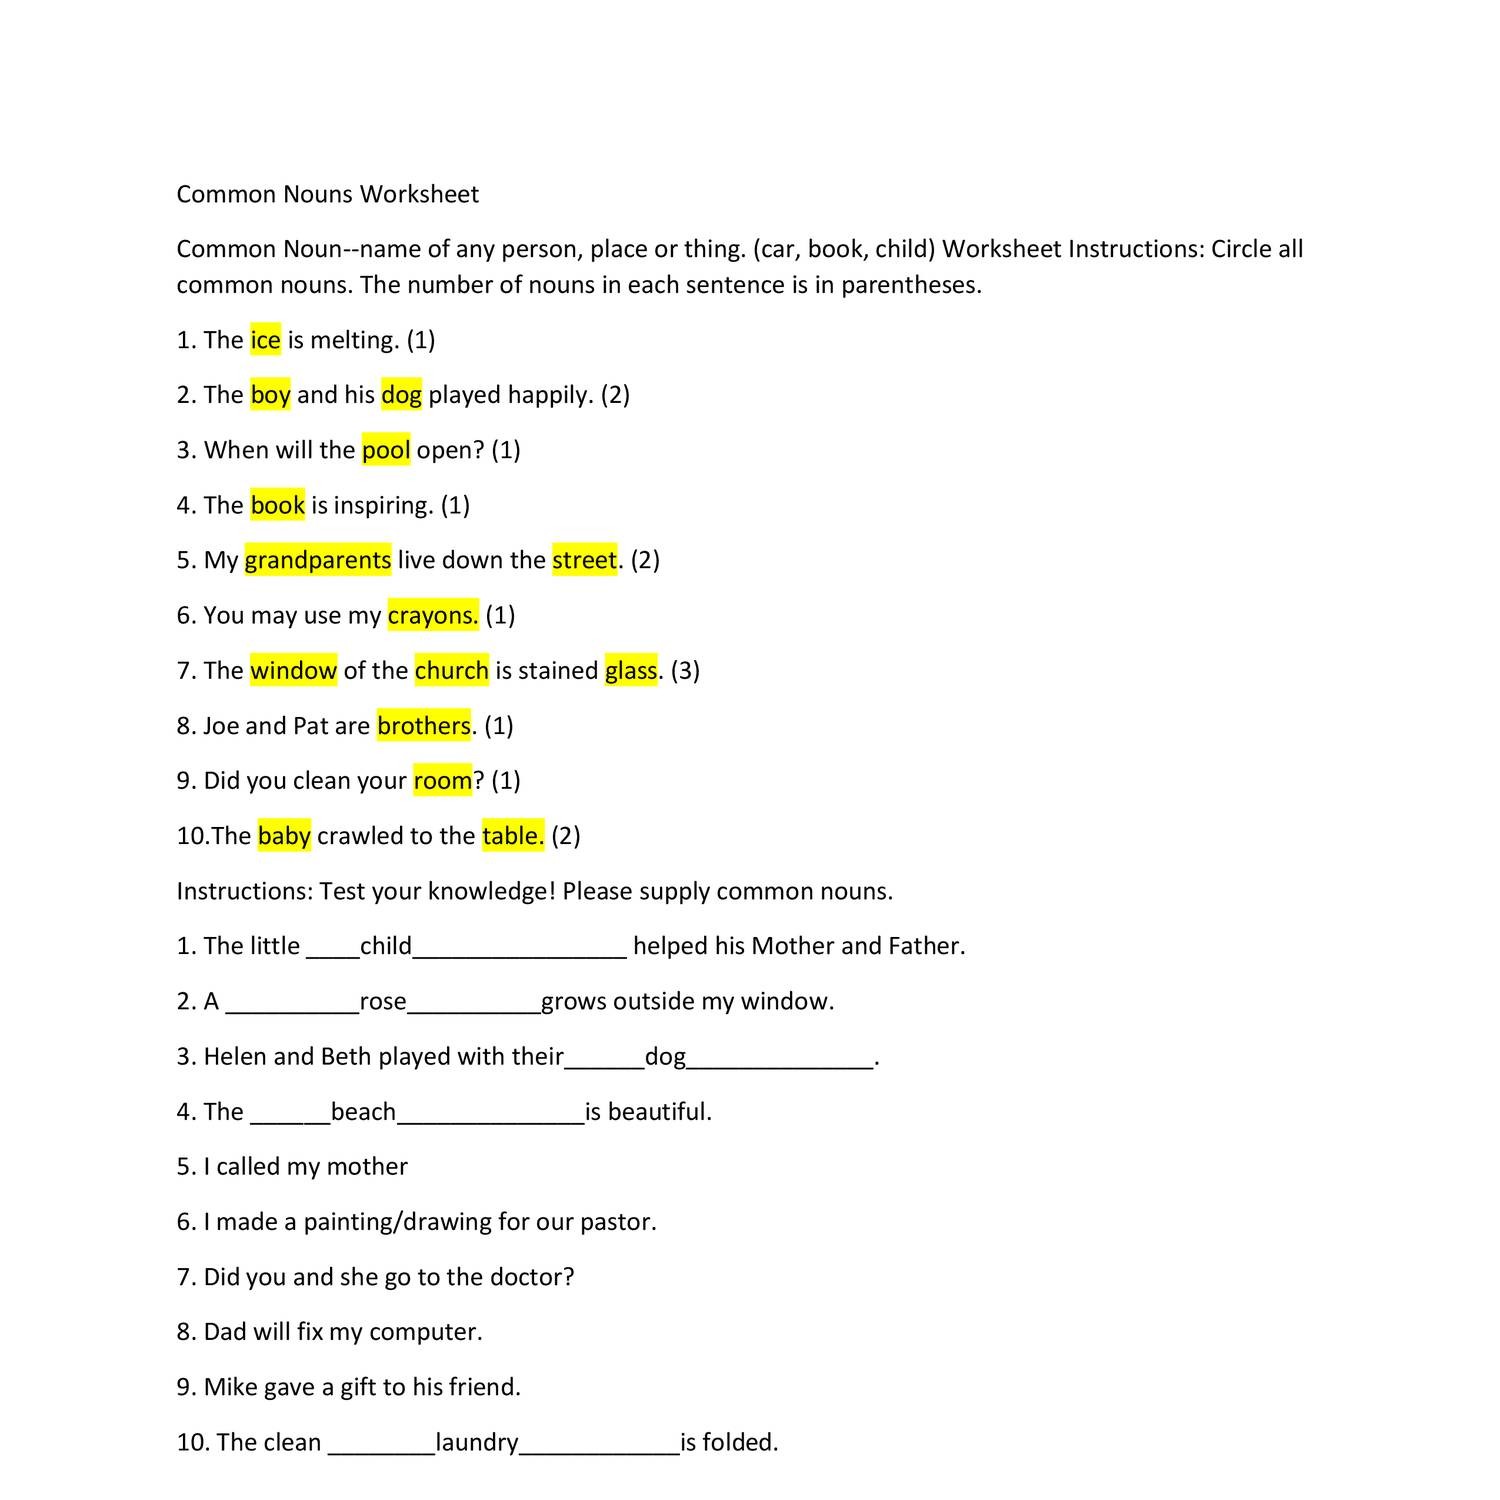 common-nouns-worksheet-answers-docx-docdroid